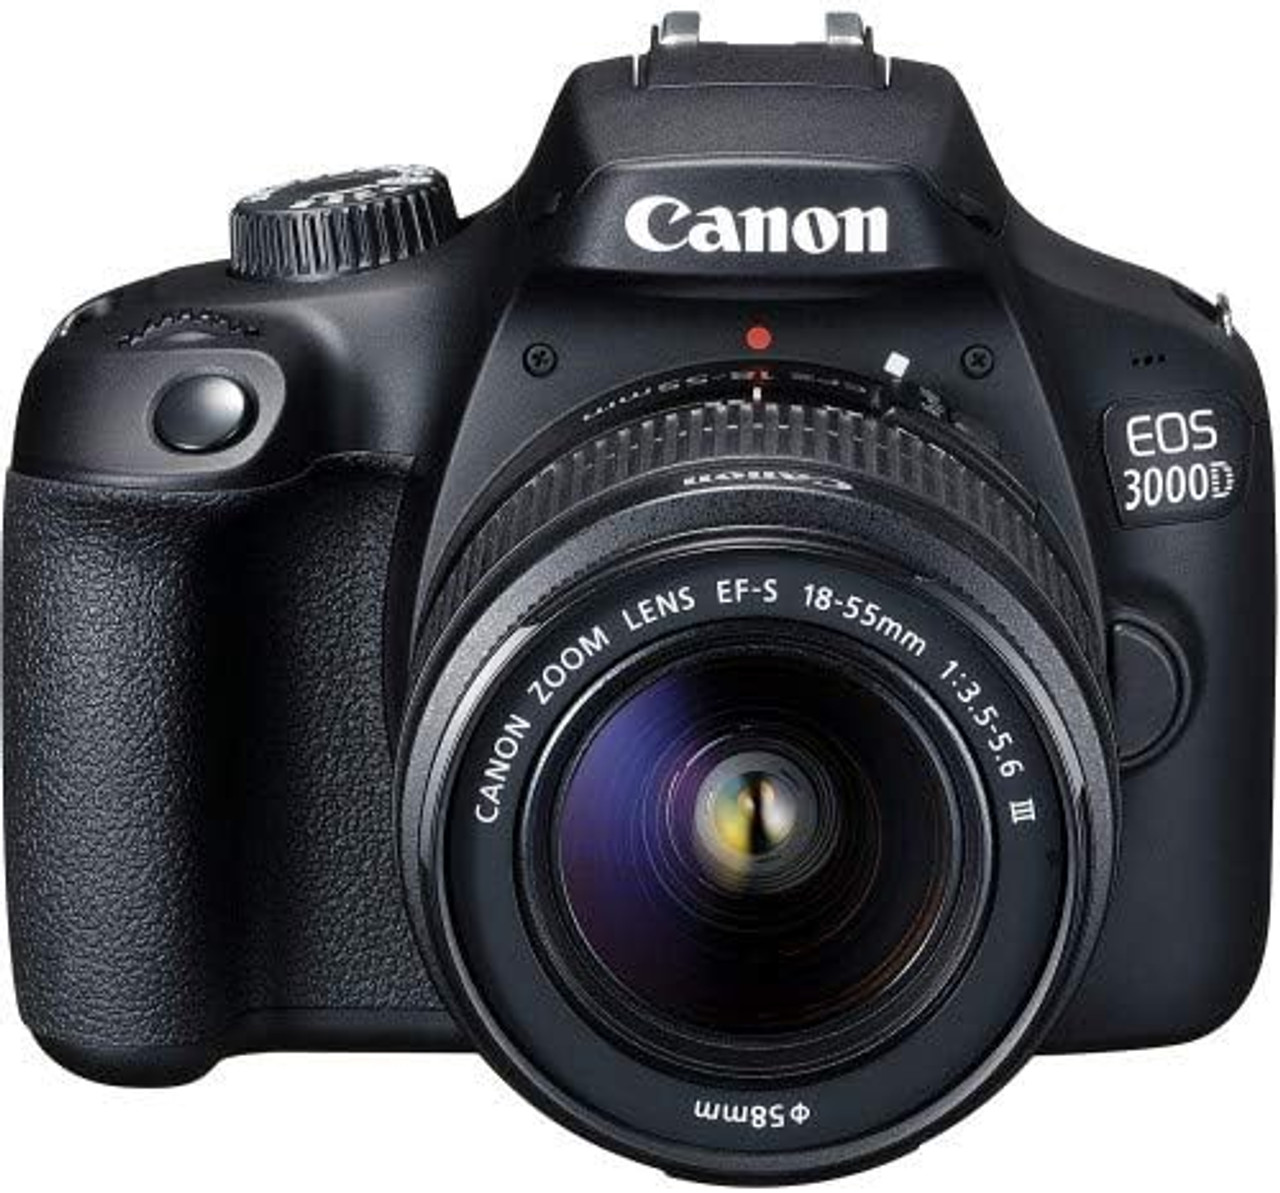  Canon DSLR Camera [EOS 90D] with Built-in Wi-Fi, Bluetooth,  DIGIC 8 Image Processor, 4K Video, Dual Pixel CMOS AF, and 3.0 Inch  Vari-Angle Touch LCD Screen, [Body Only], Black 